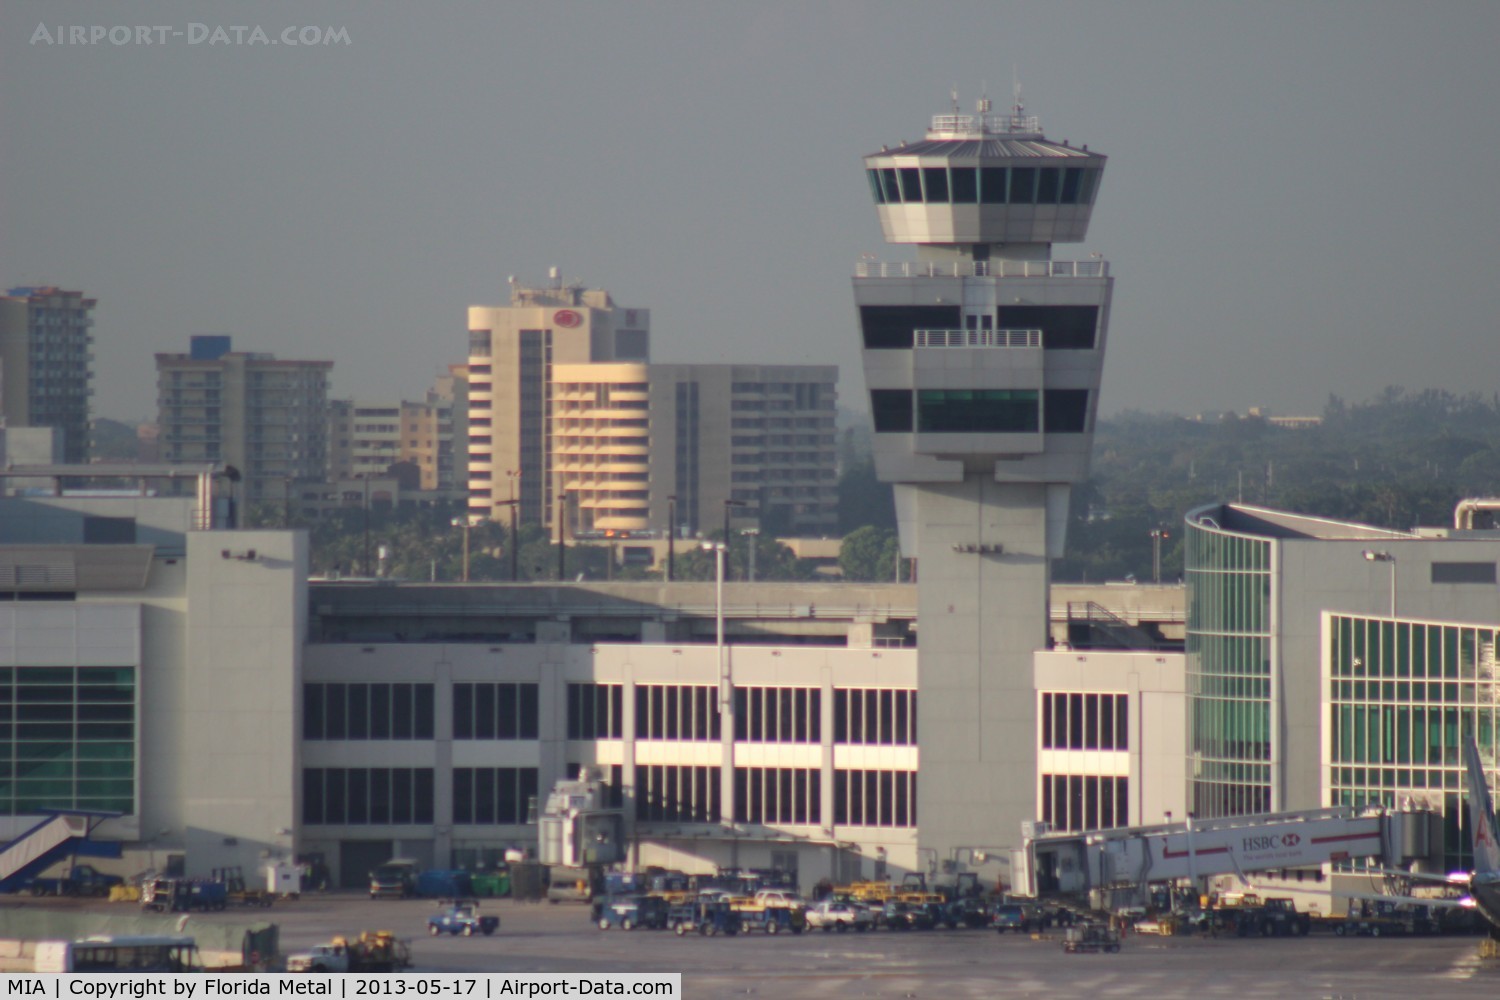 Miami International Airport (MIA) - American Airlines tower